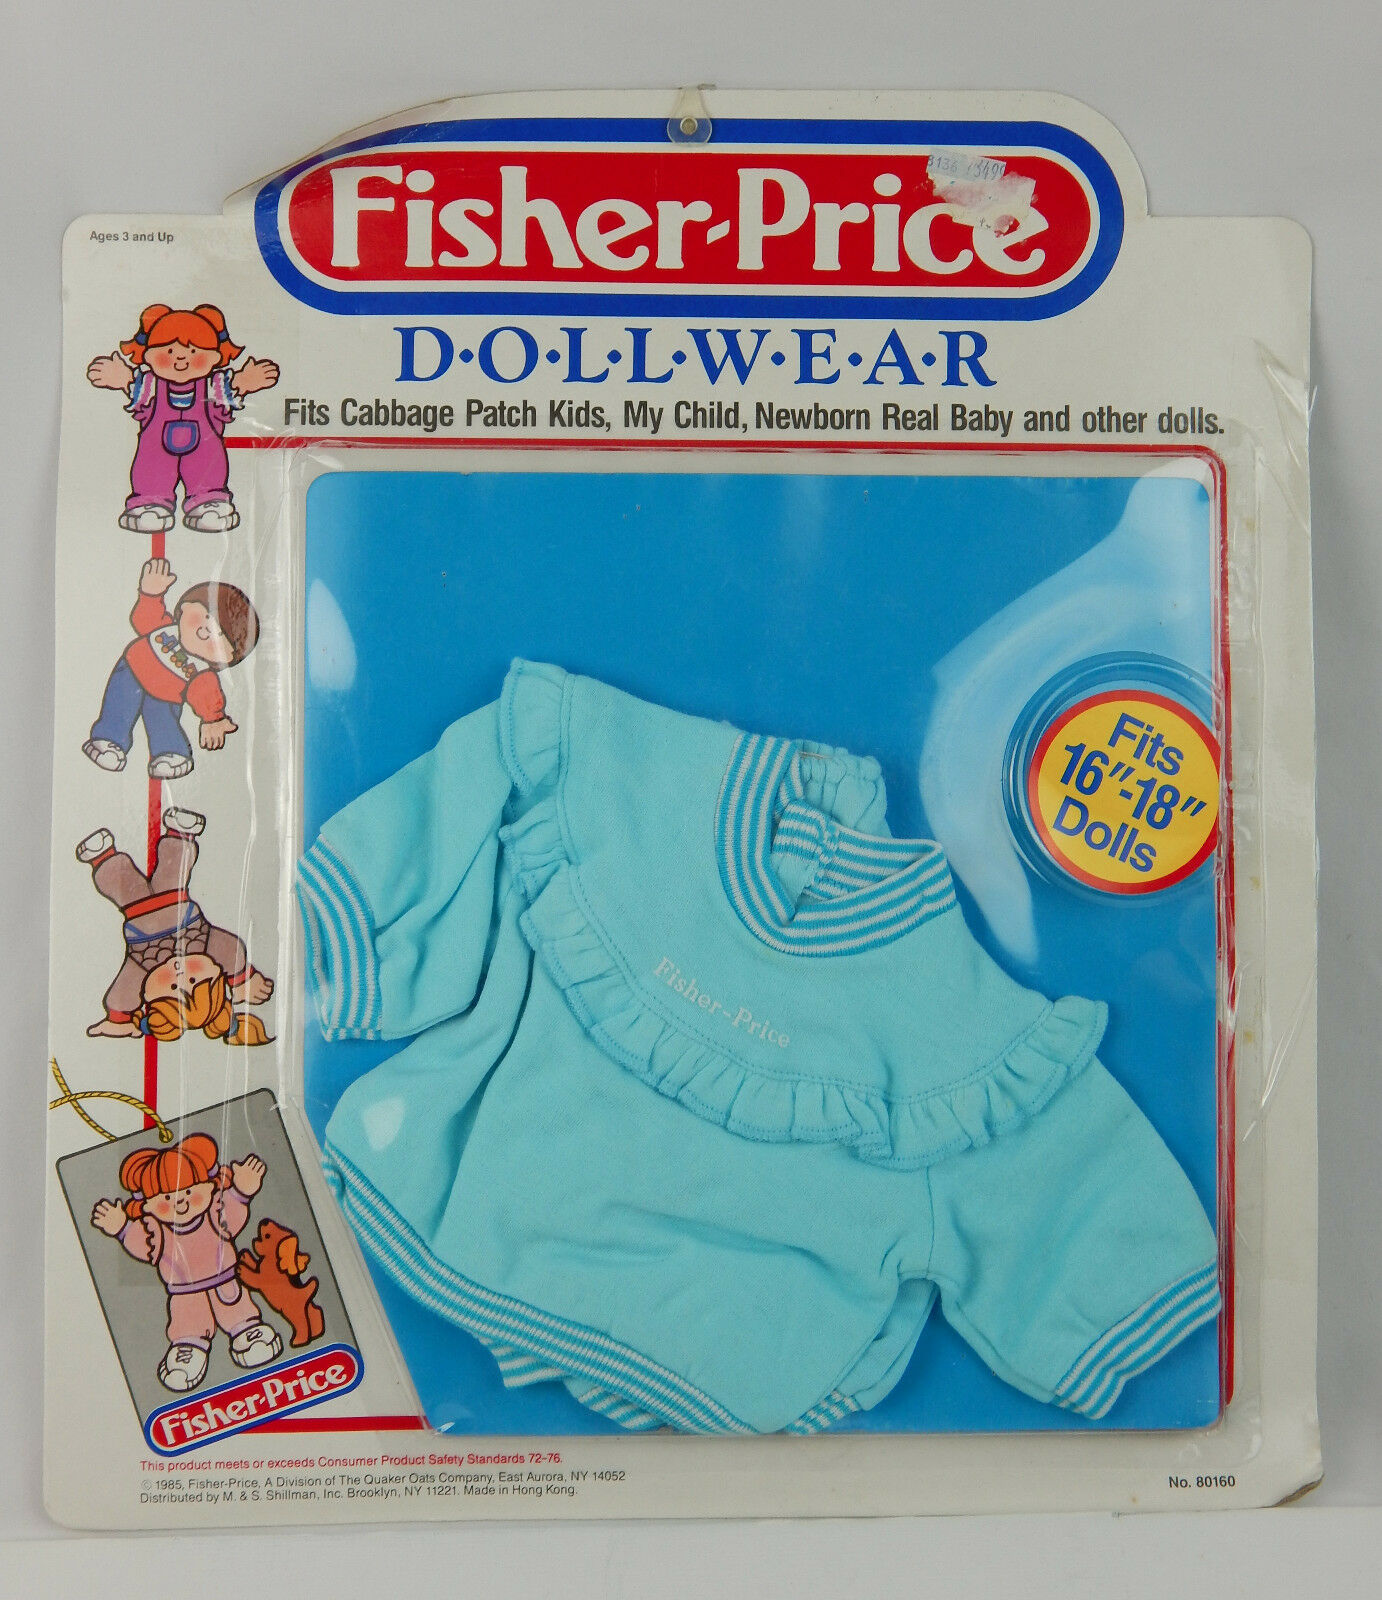 Vintage 1985 Fisher Price Dollwear Doll Clothing Fits 16"-18"  Baby Blue